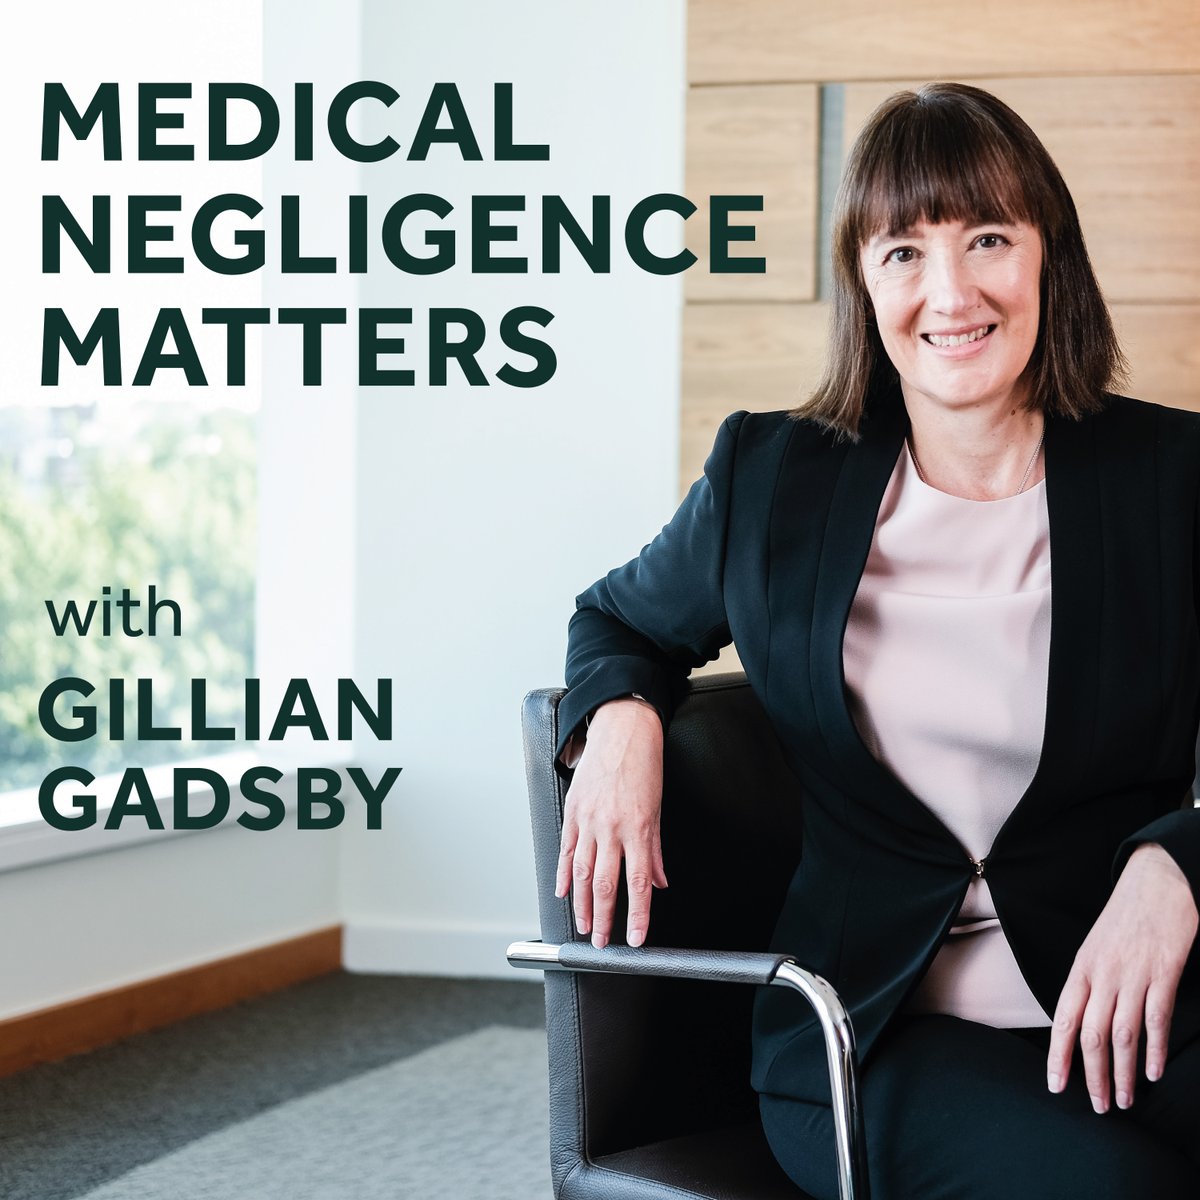 We’re excited to announce the new Medical Negligence Matters podcast! 🎧

Series 1 starts DATE with new episodes every DAY. Hosted by @GillianGadsbyGW, learn all you need to know about #medicalnegligence and making a claim in our brand new podcast!